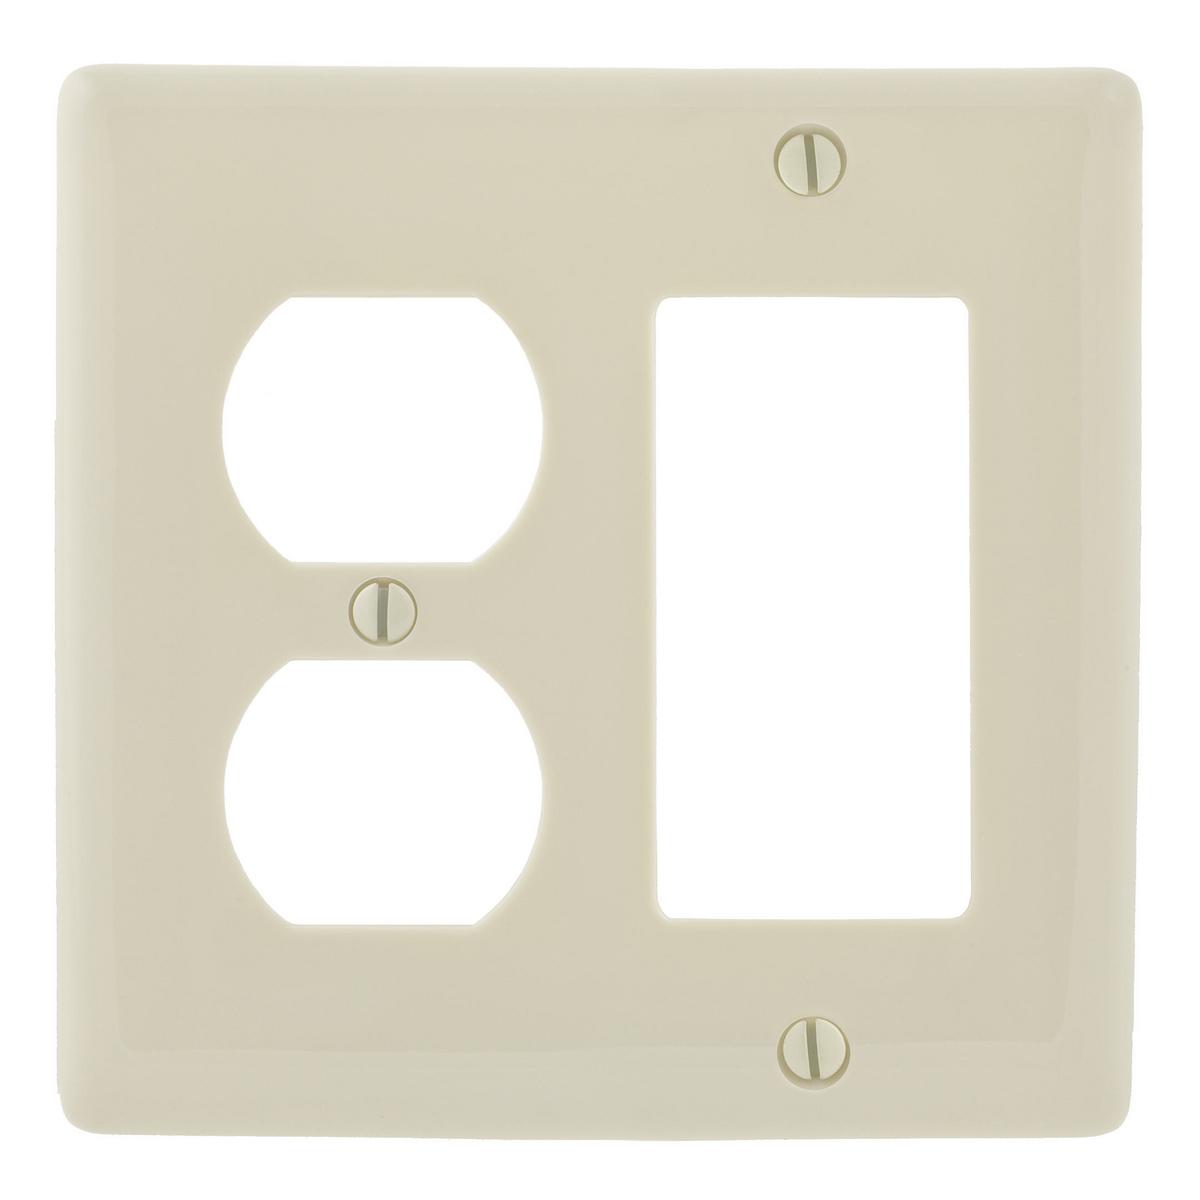 Hubbell NPJ826LA Wallplates and Box Covers, Wallplate, Nylon, Mid-Sized, 2-Gang, 1) Duplex 1) Decorator, Light Almond  ; Reinforcement ribs for extra strength ; High-impact, self-extinguishing nylon material ; Captive screw feature holds mounting screw in place ; Standard